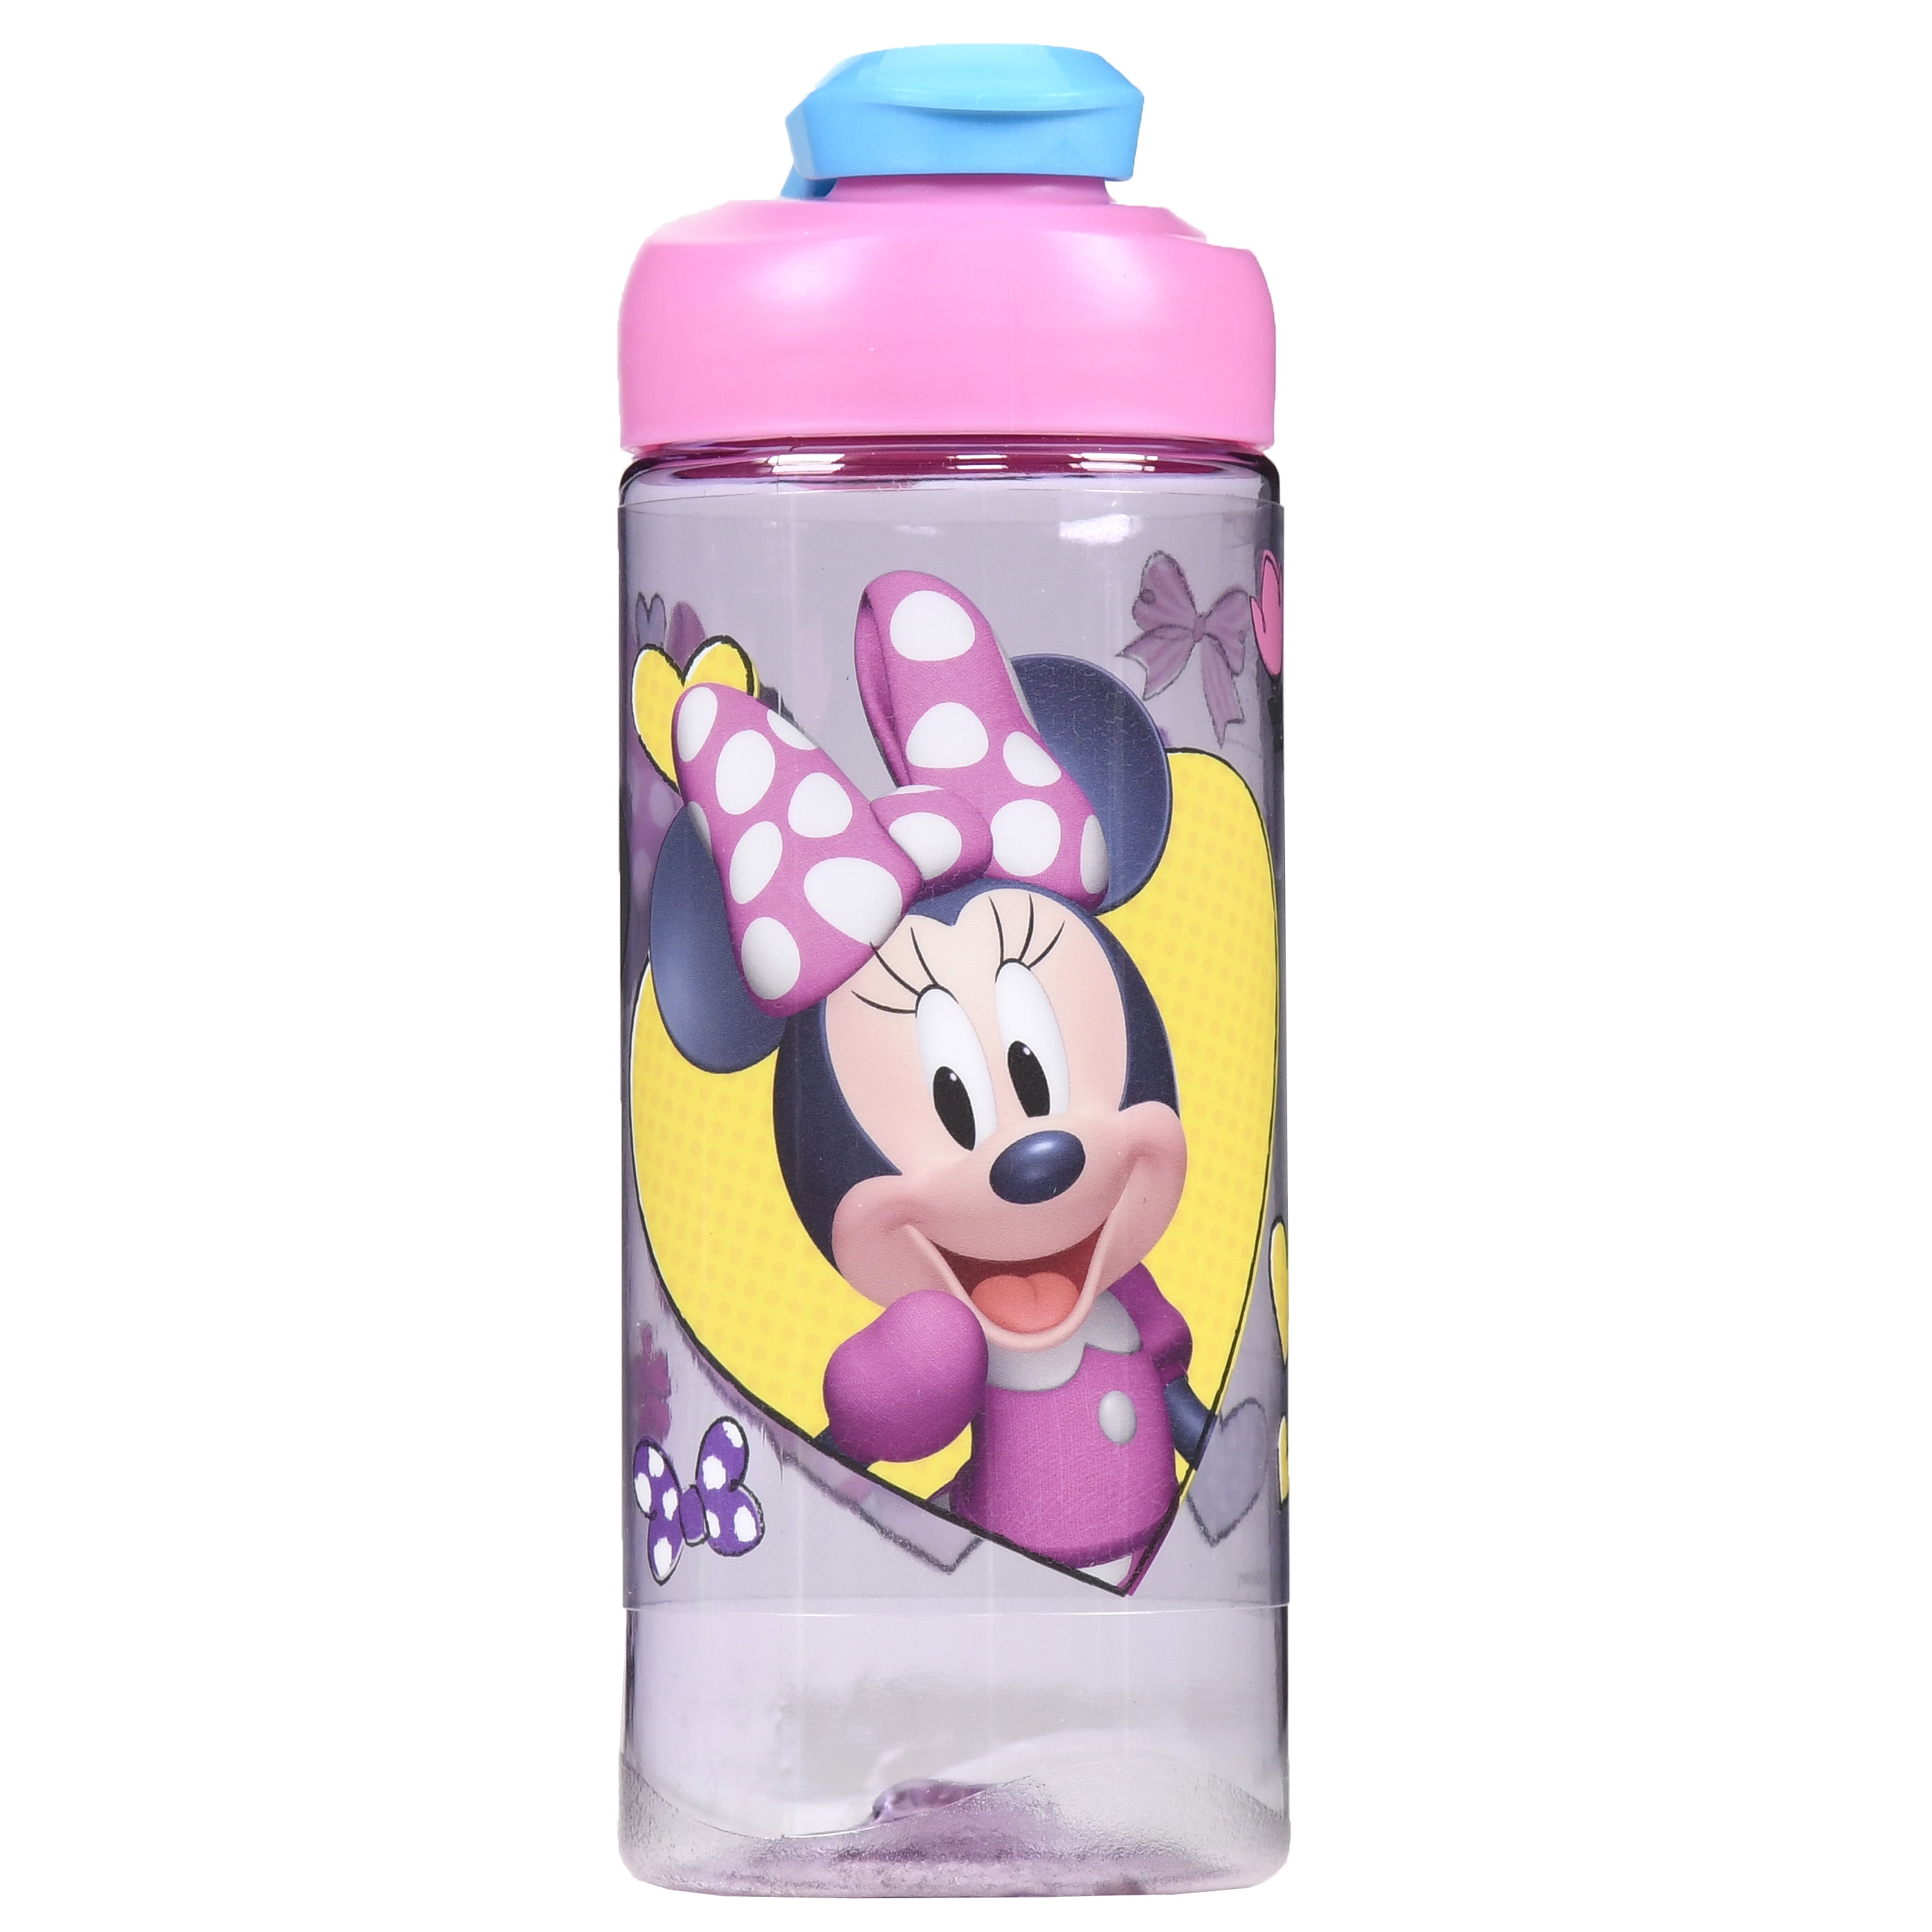 Disney Authentic Minnie Mouse Water Bottle - 16 oz - New